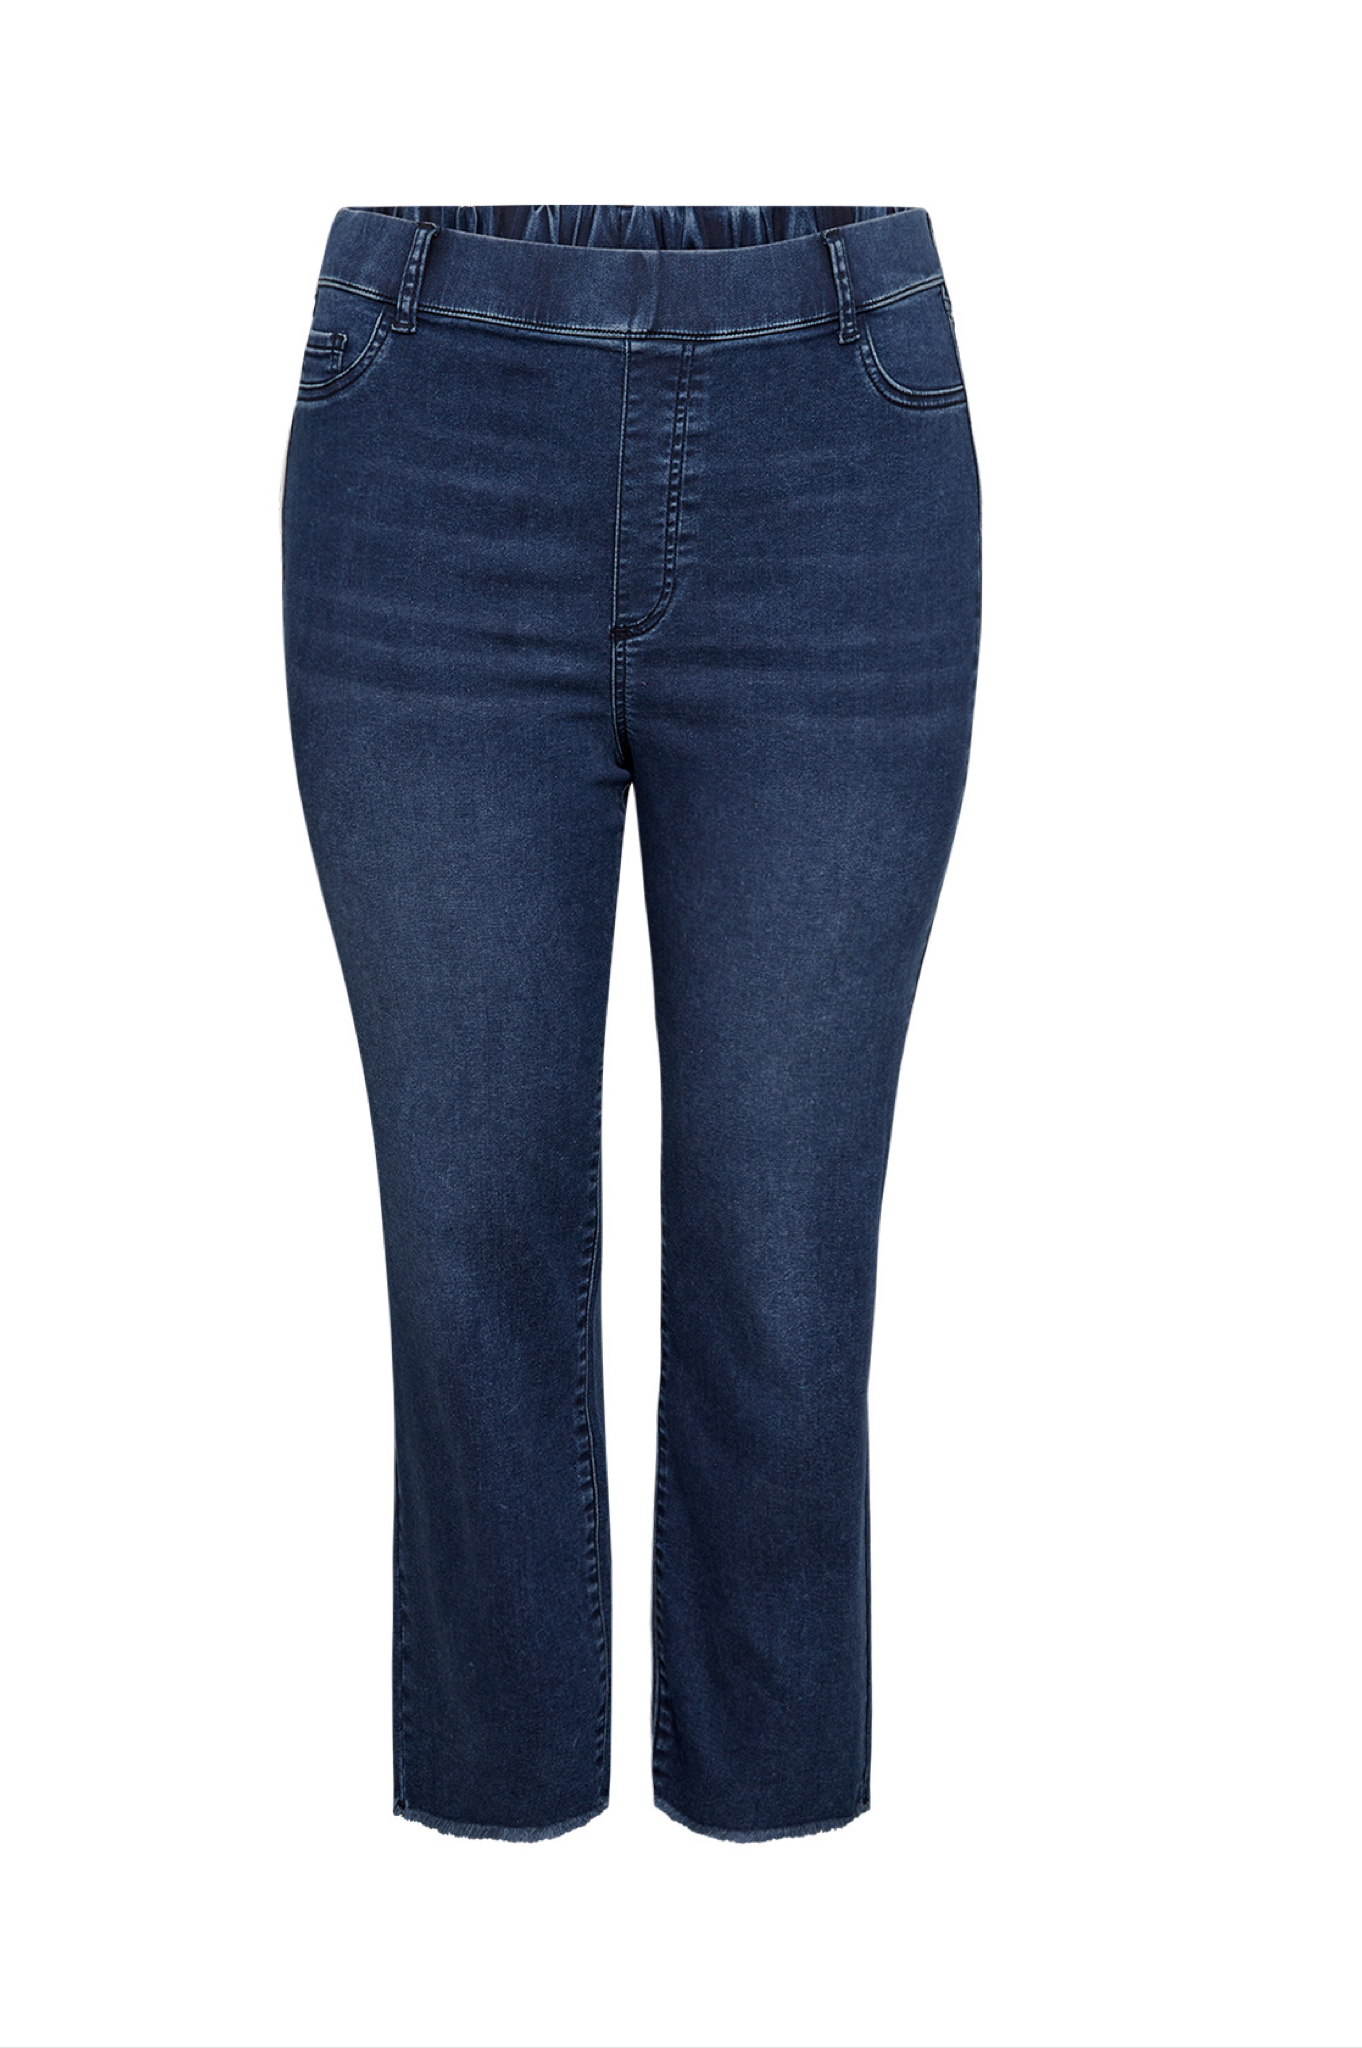 Cille - jeans